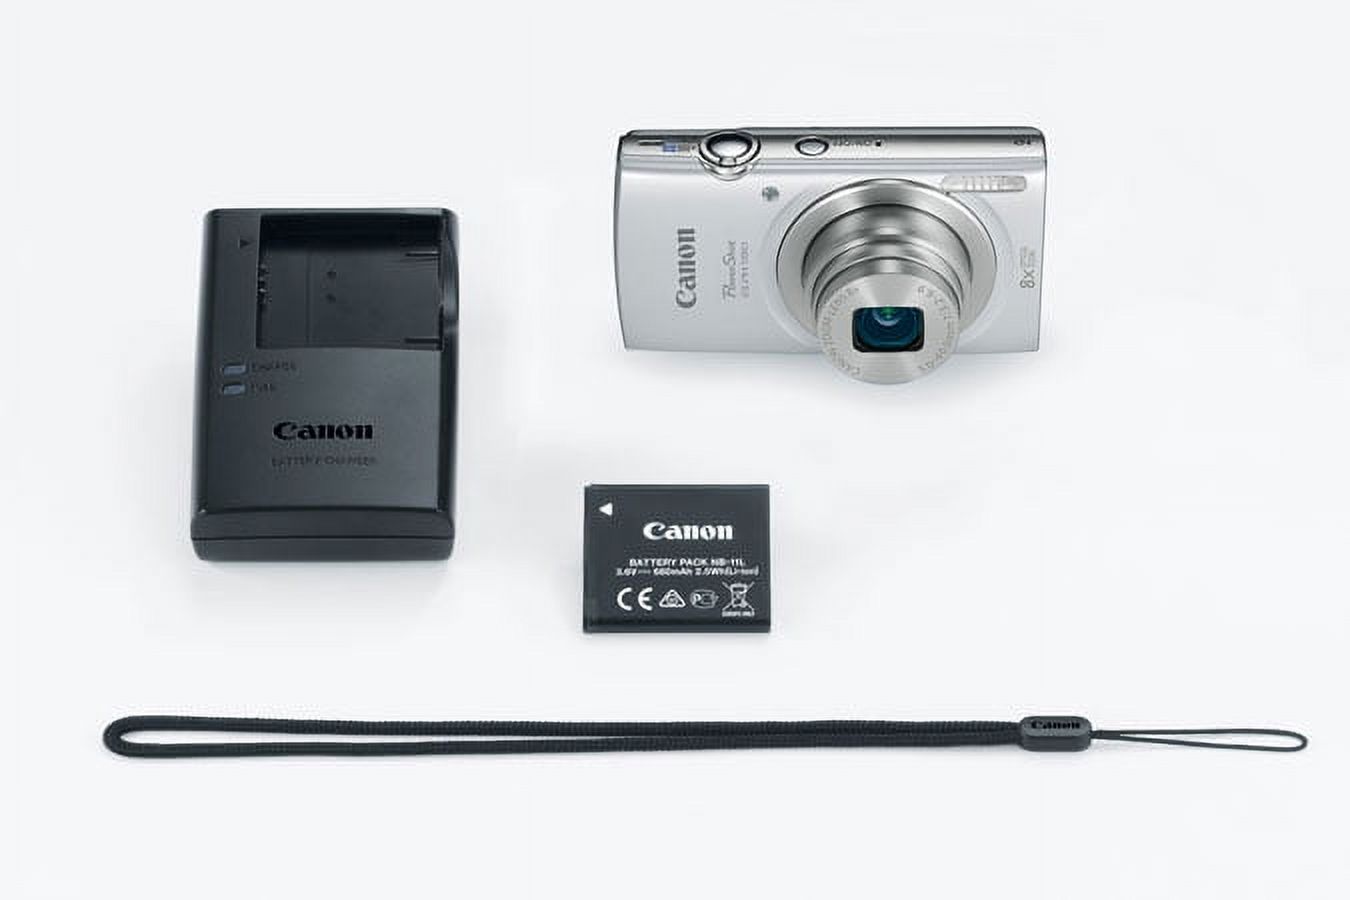 Canon Powershot Elph 180 Silver Camera - image 4 of 8